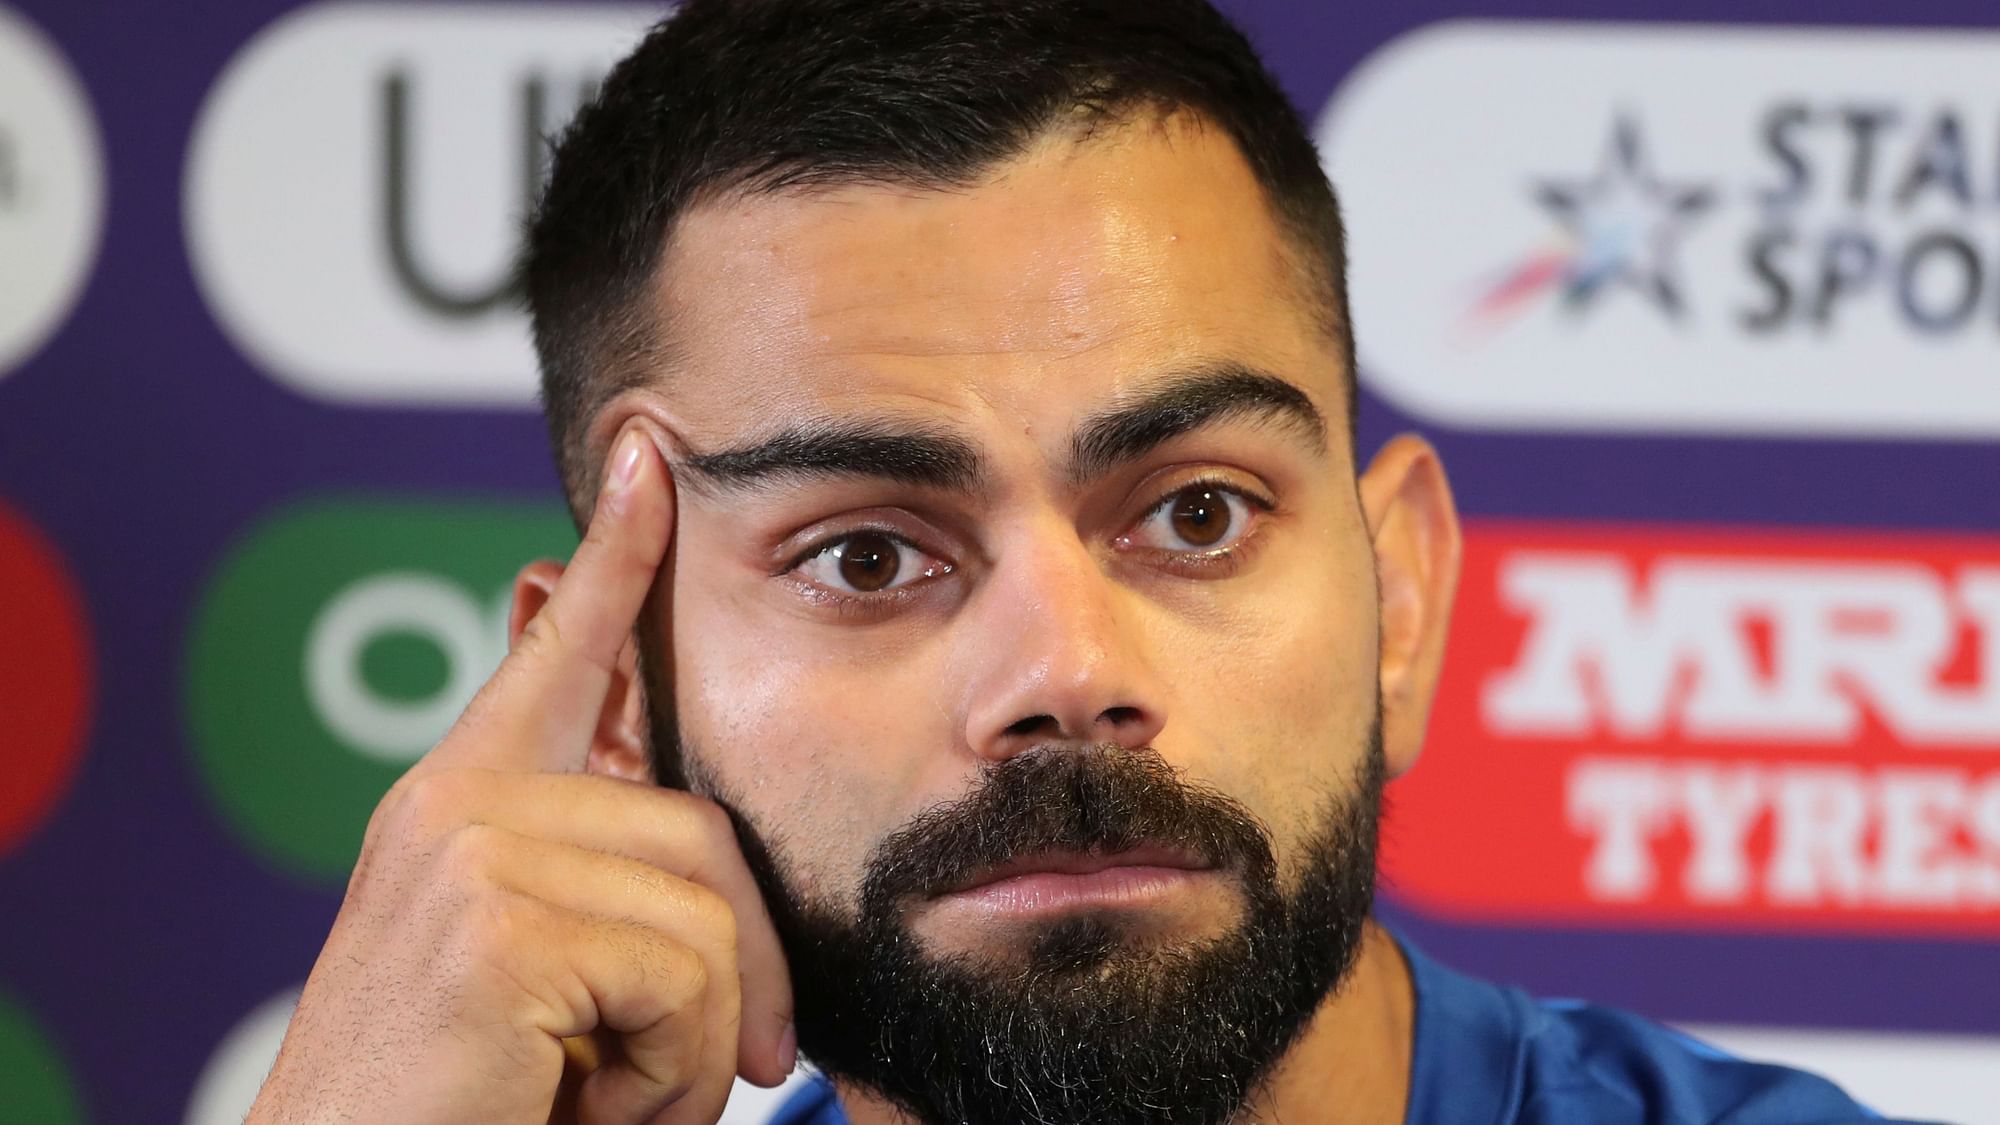 Sunil Chhetri quizzed Virat Kohli about the one innings he wishes he had played.